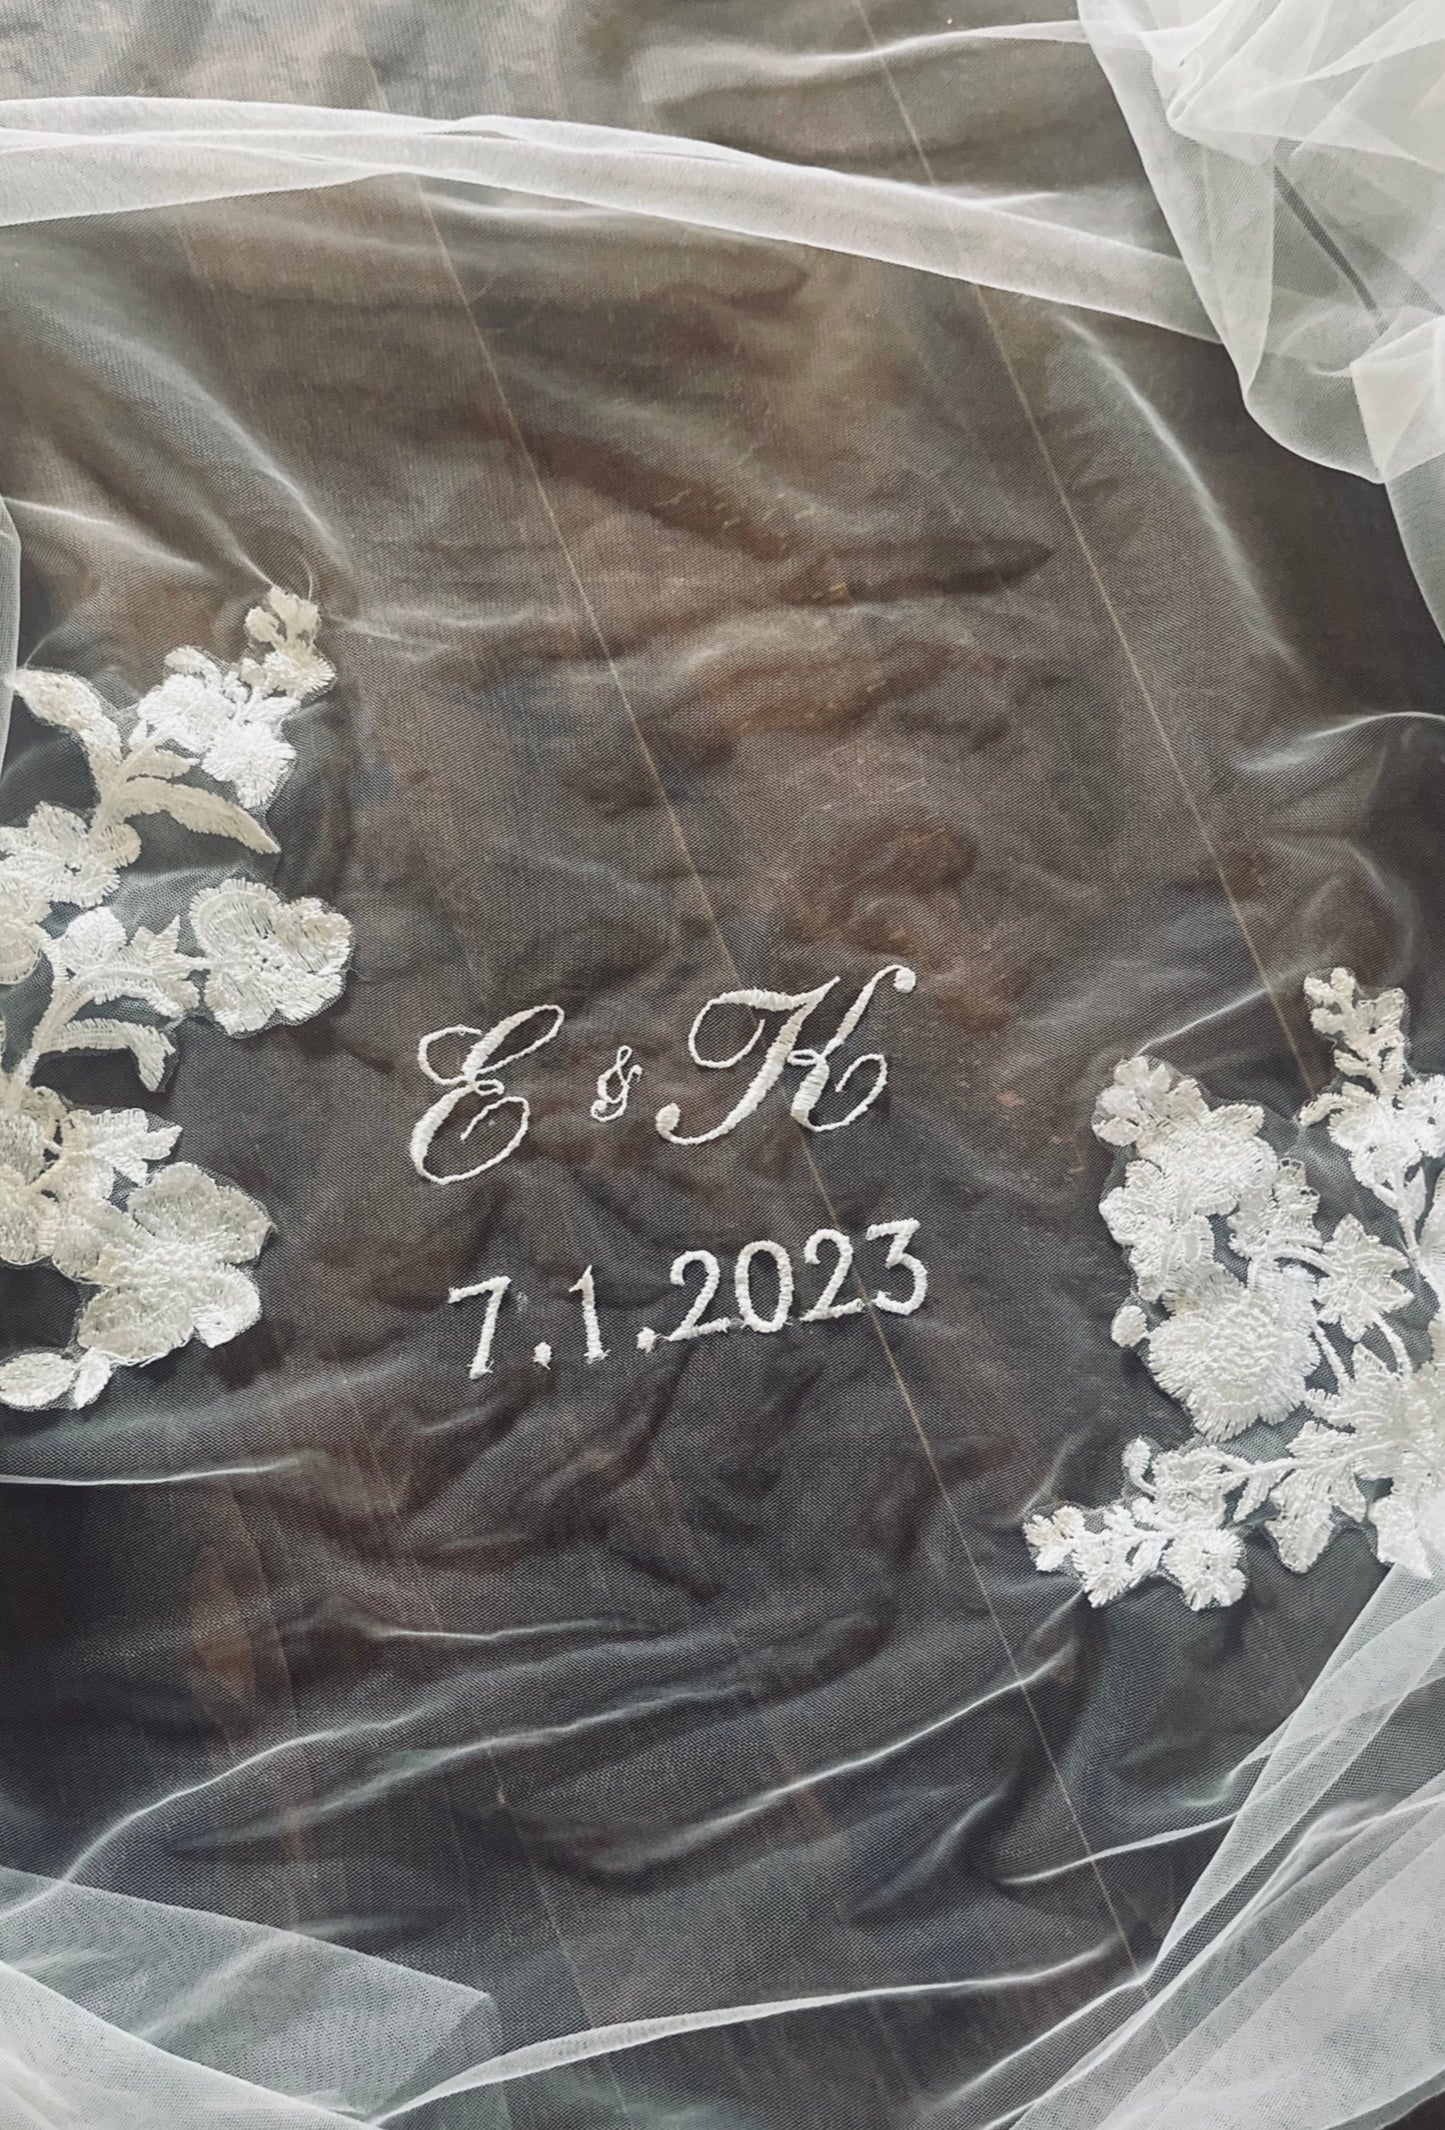 customized embroidered unity wedding veil with initials and wedding date encircled with French flower lace